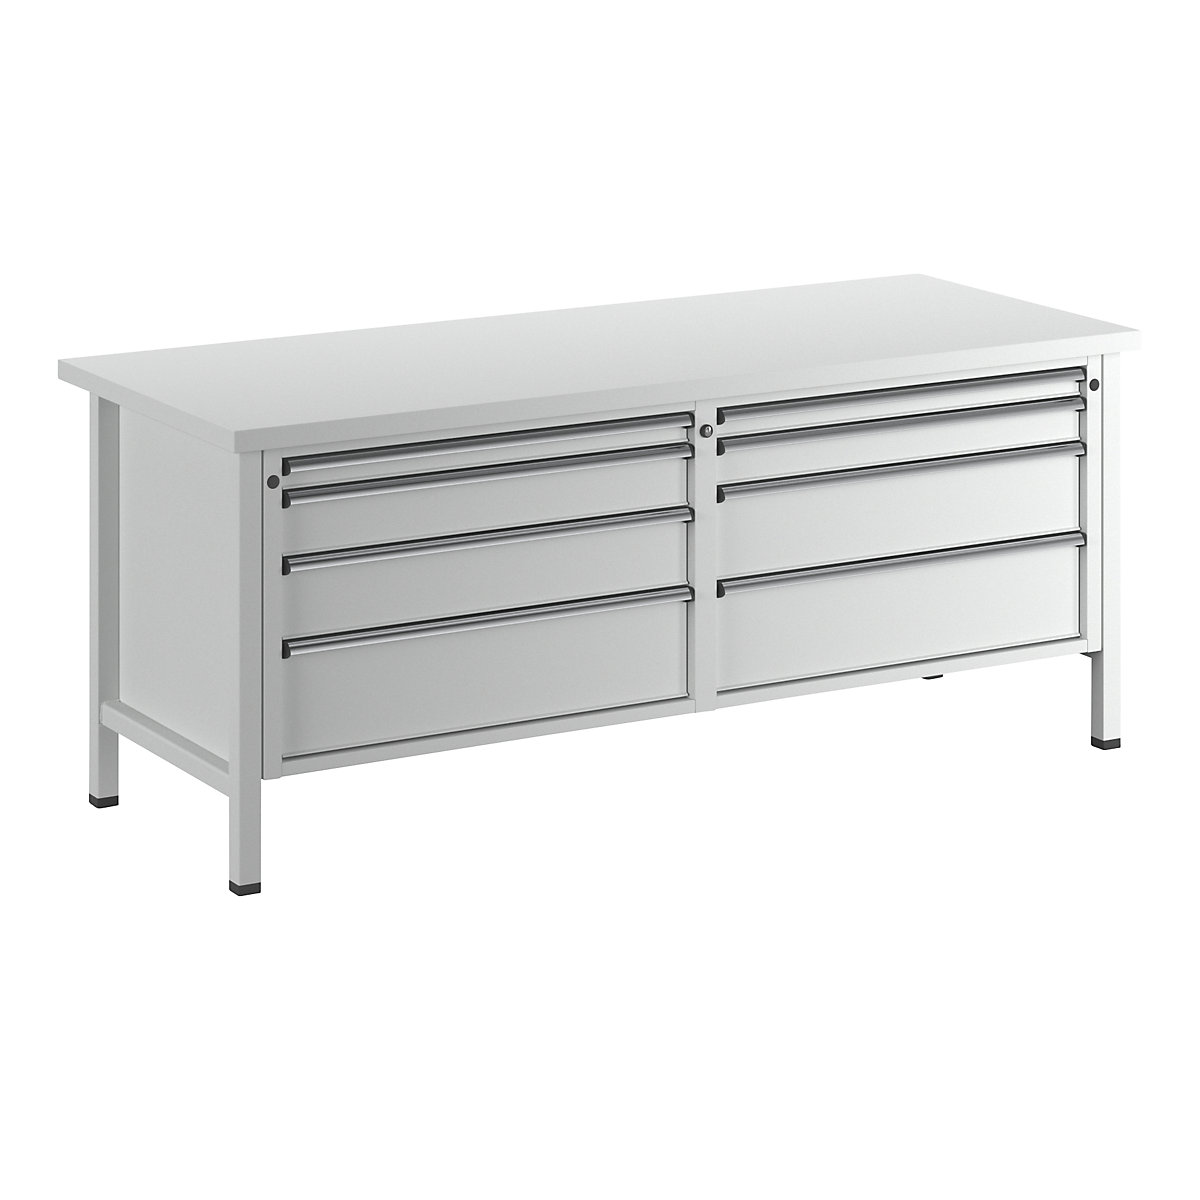 Workbench with XL/XXL drawers, frame construction – ANKE, width 2000 mm, 8 drawers, universal worktop, front in light grey-10